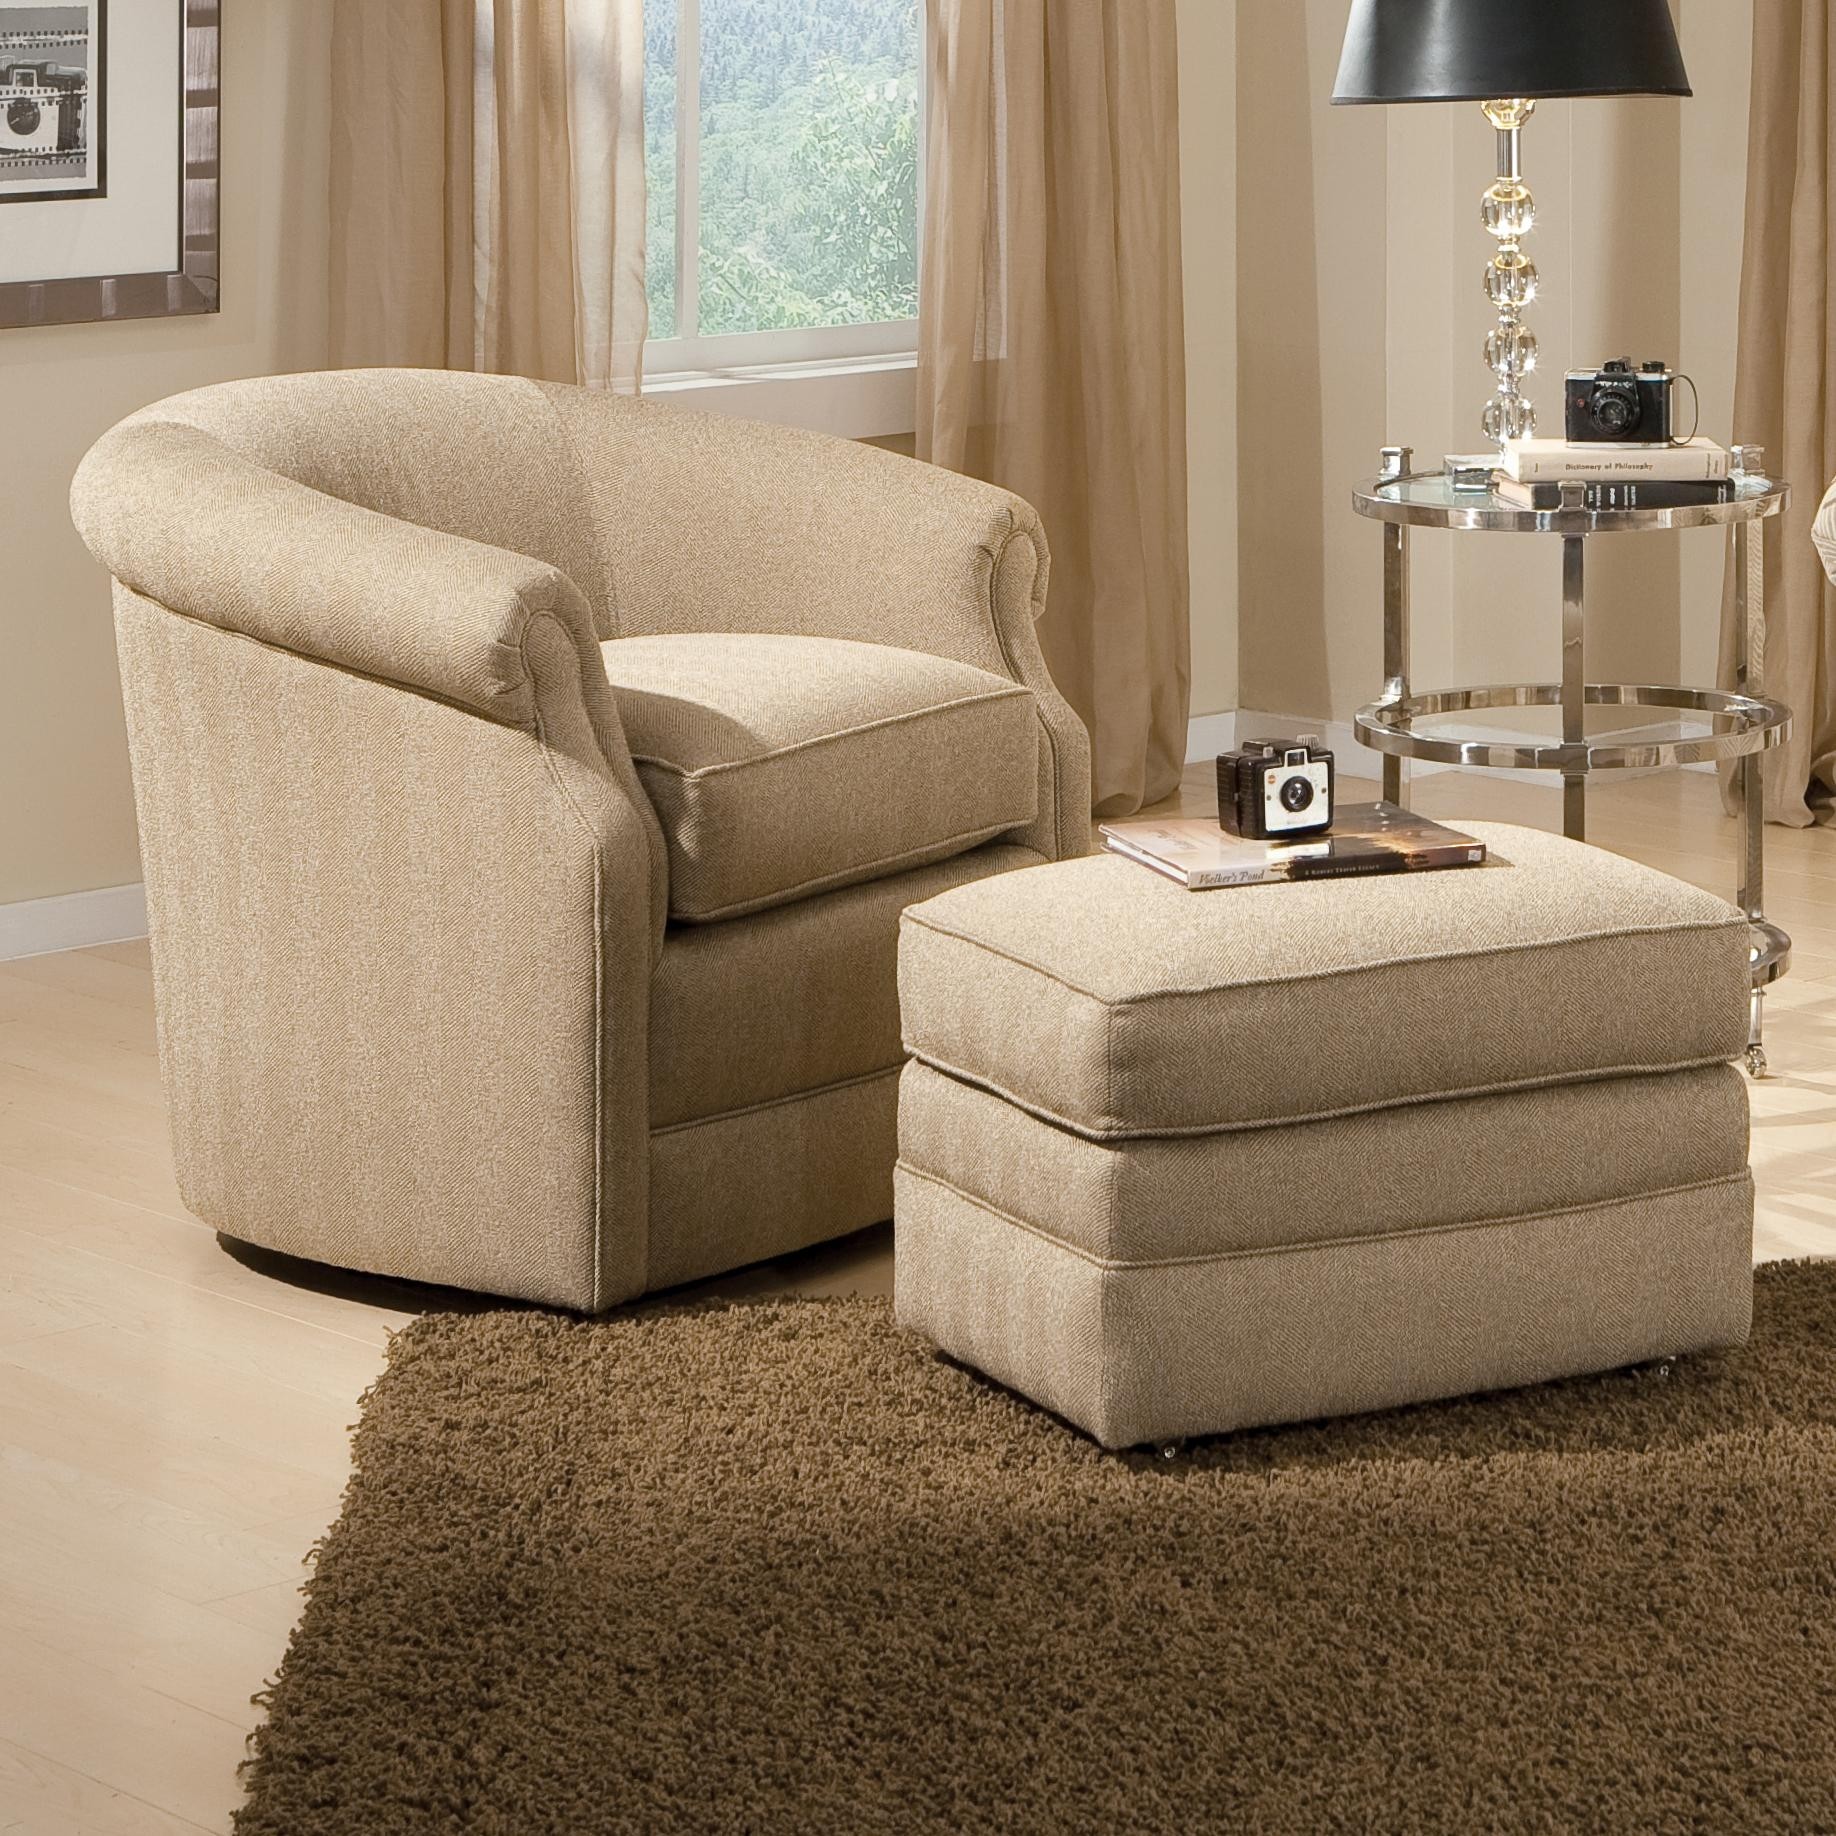 Smith brothers accent chairs and ottomans sb barrel swivel